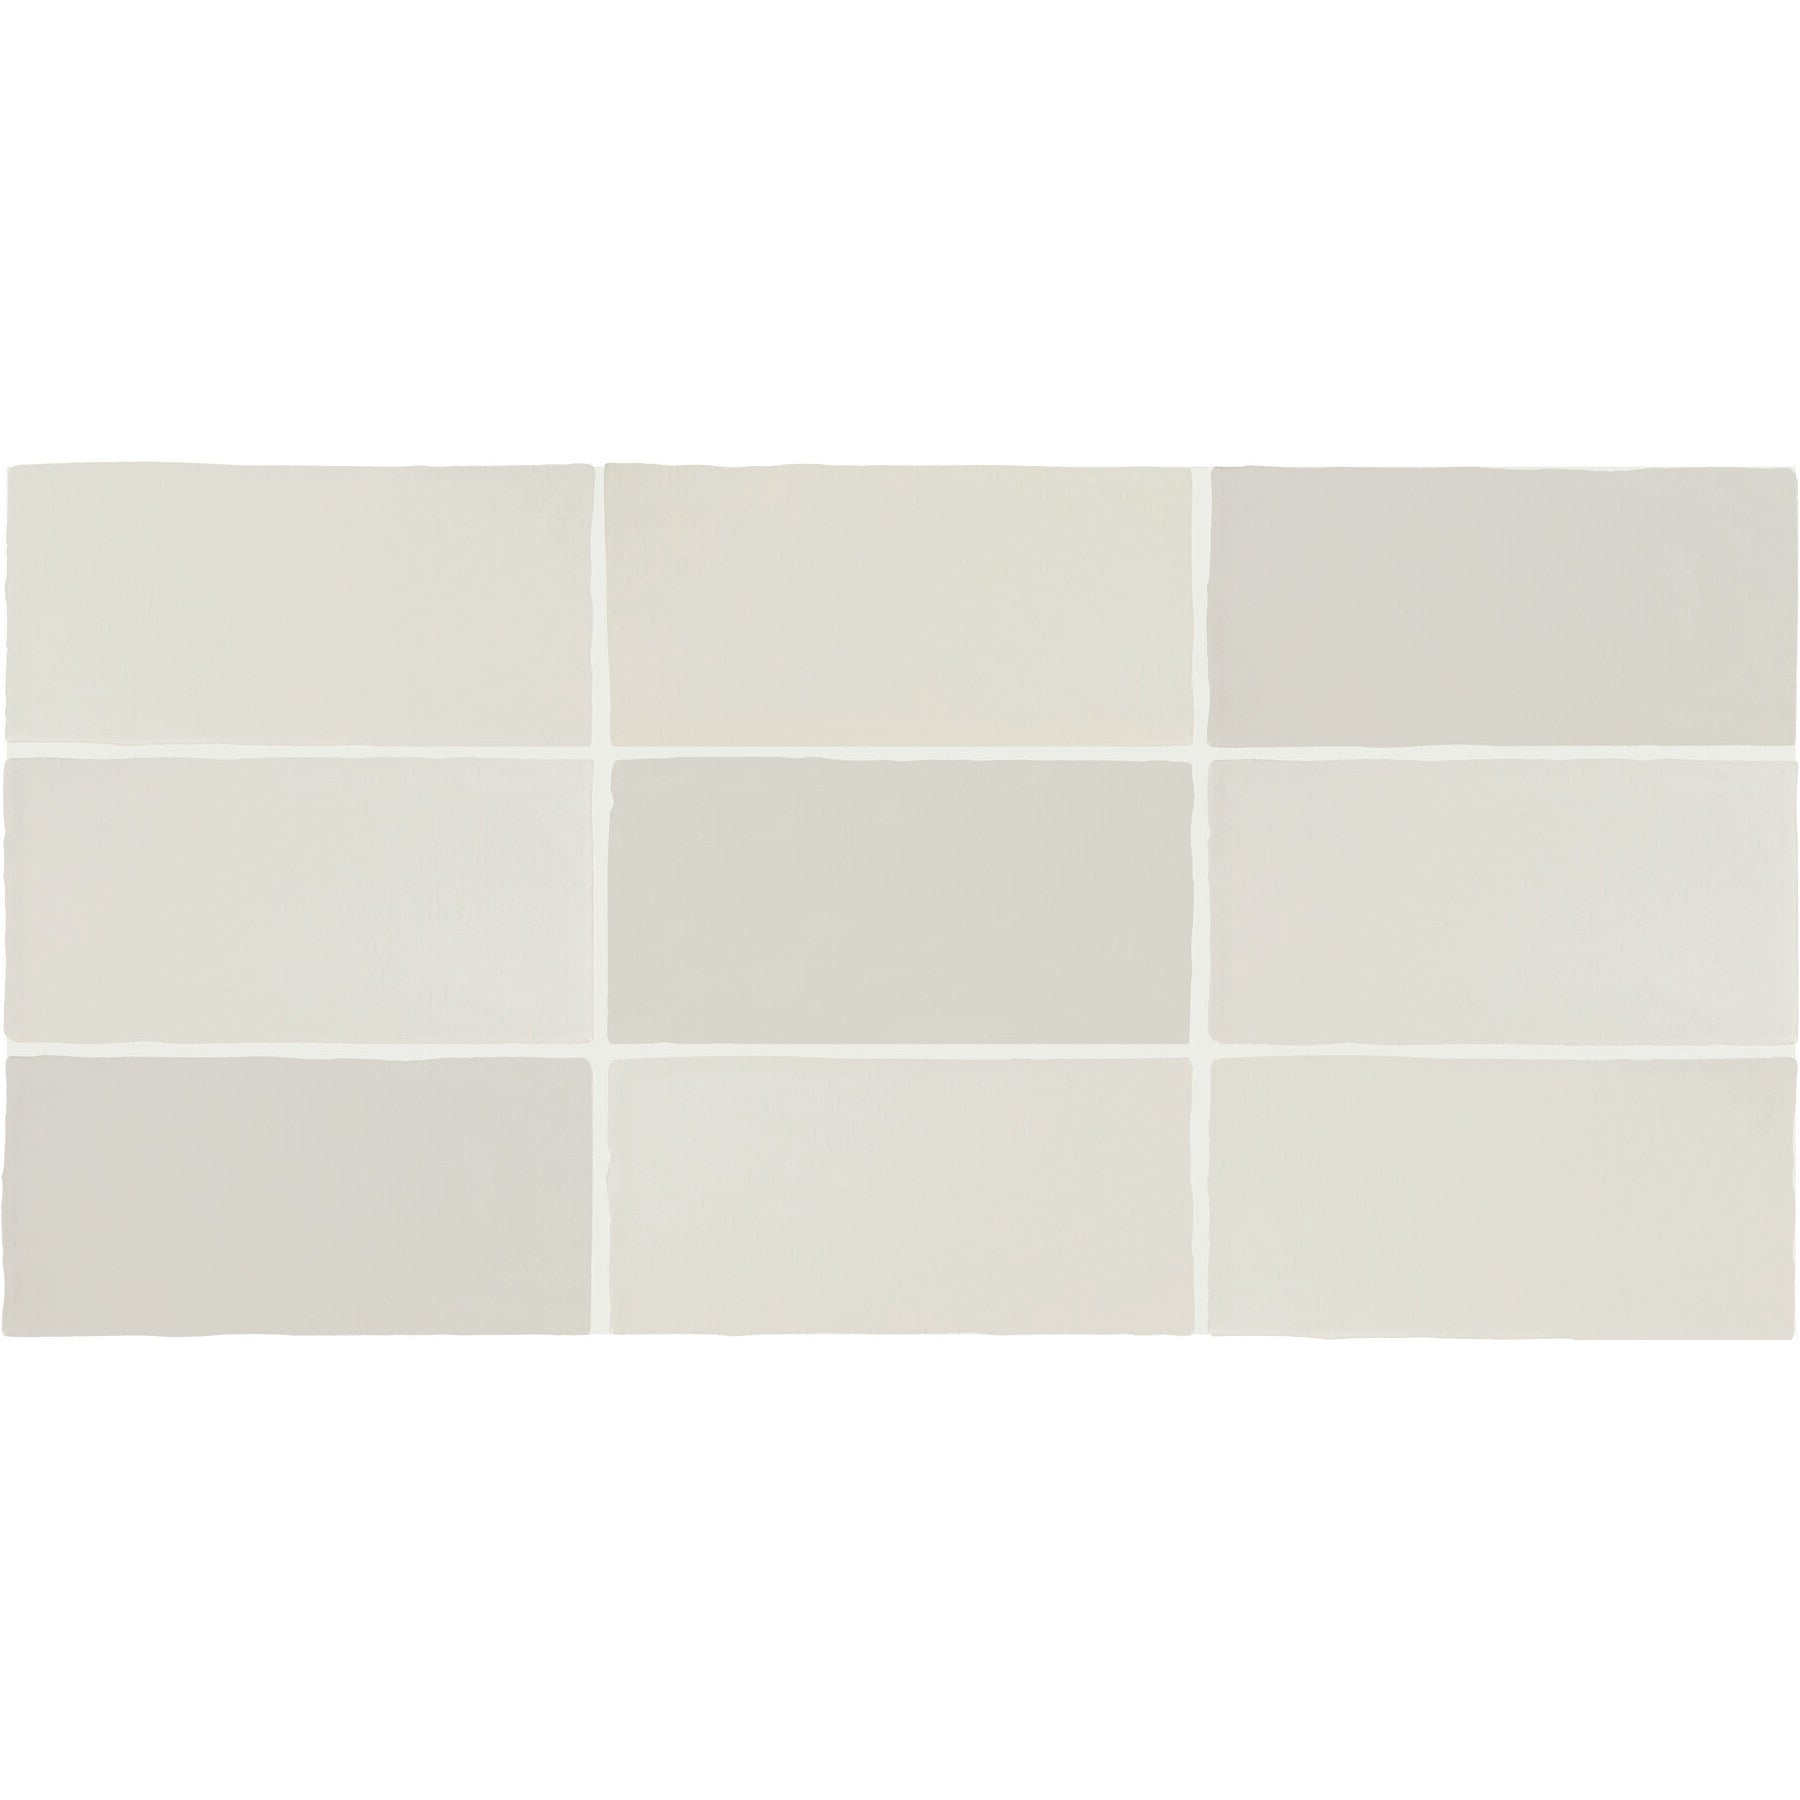 Daltile - Farrier - 2.5 in. x 5 in. Glazed Ceramic Wall Tile - Andalusian Grey